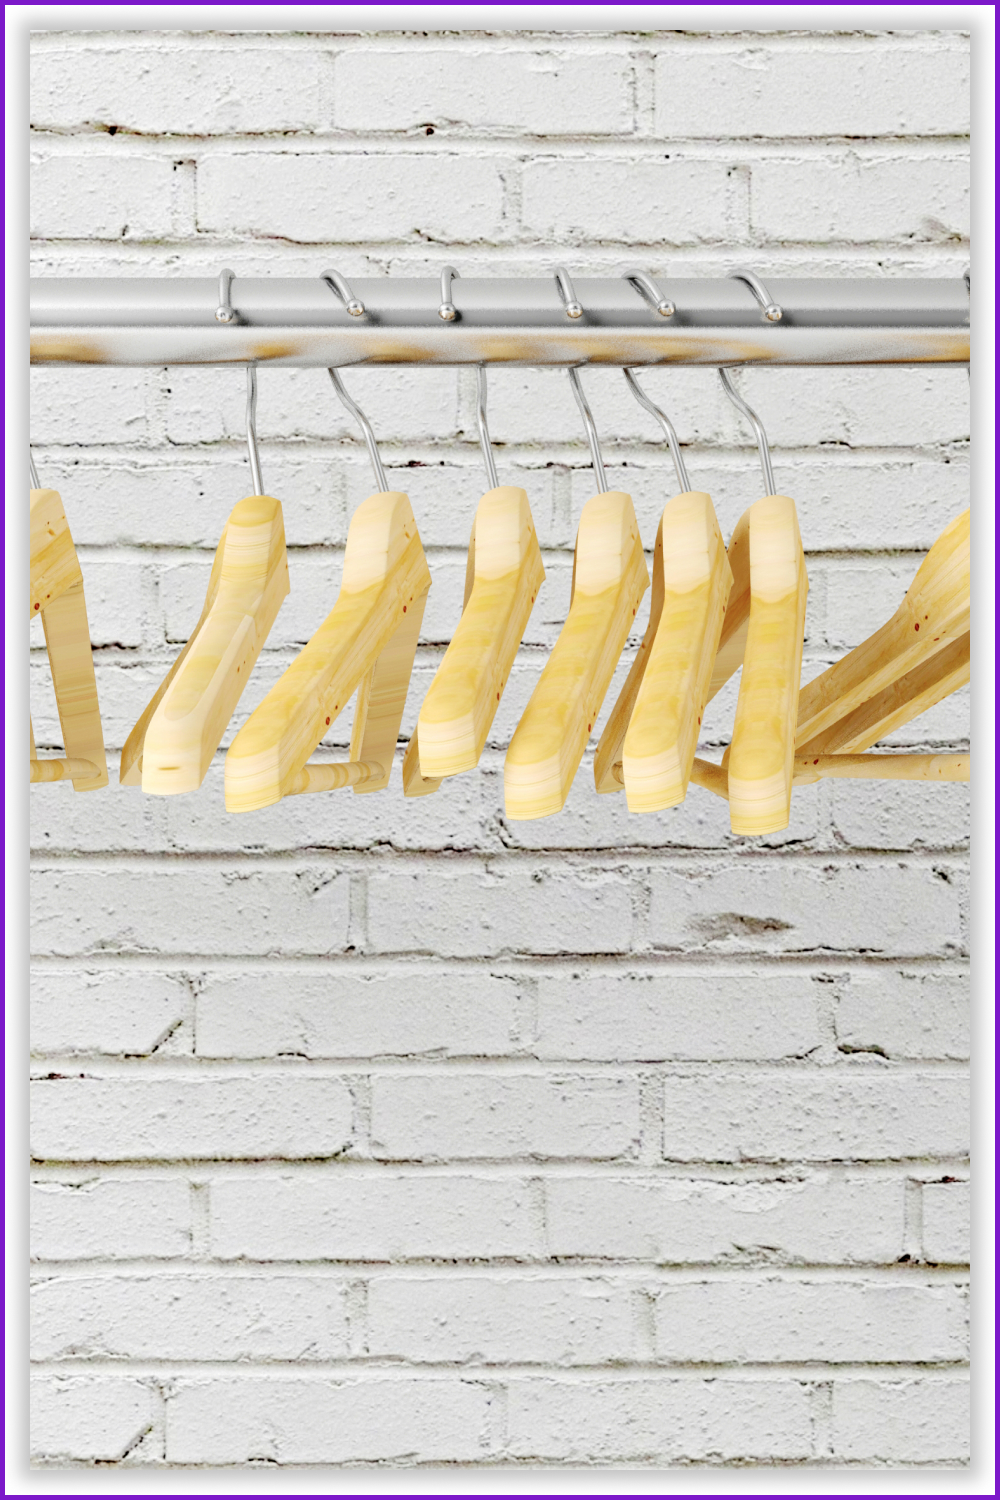 Wooden hangers against a white brick wall.